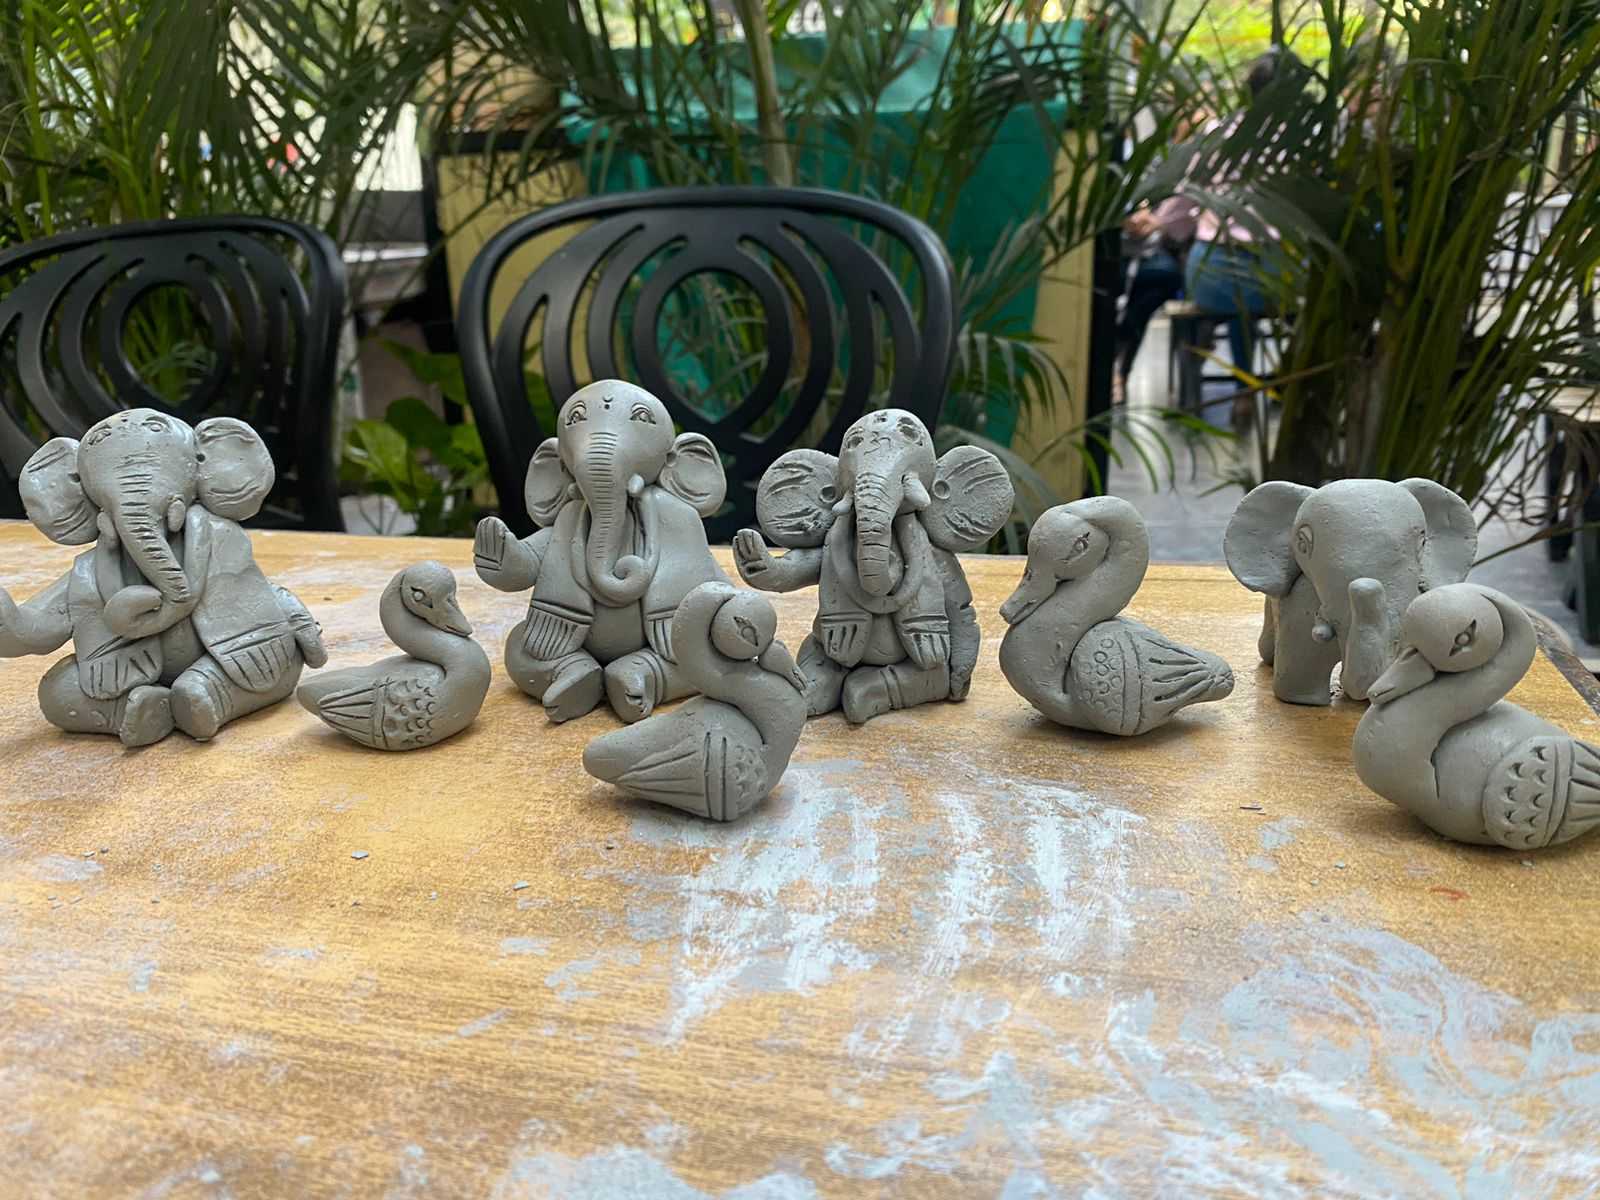 Our members crafted swans and Lord Ganesha from clay